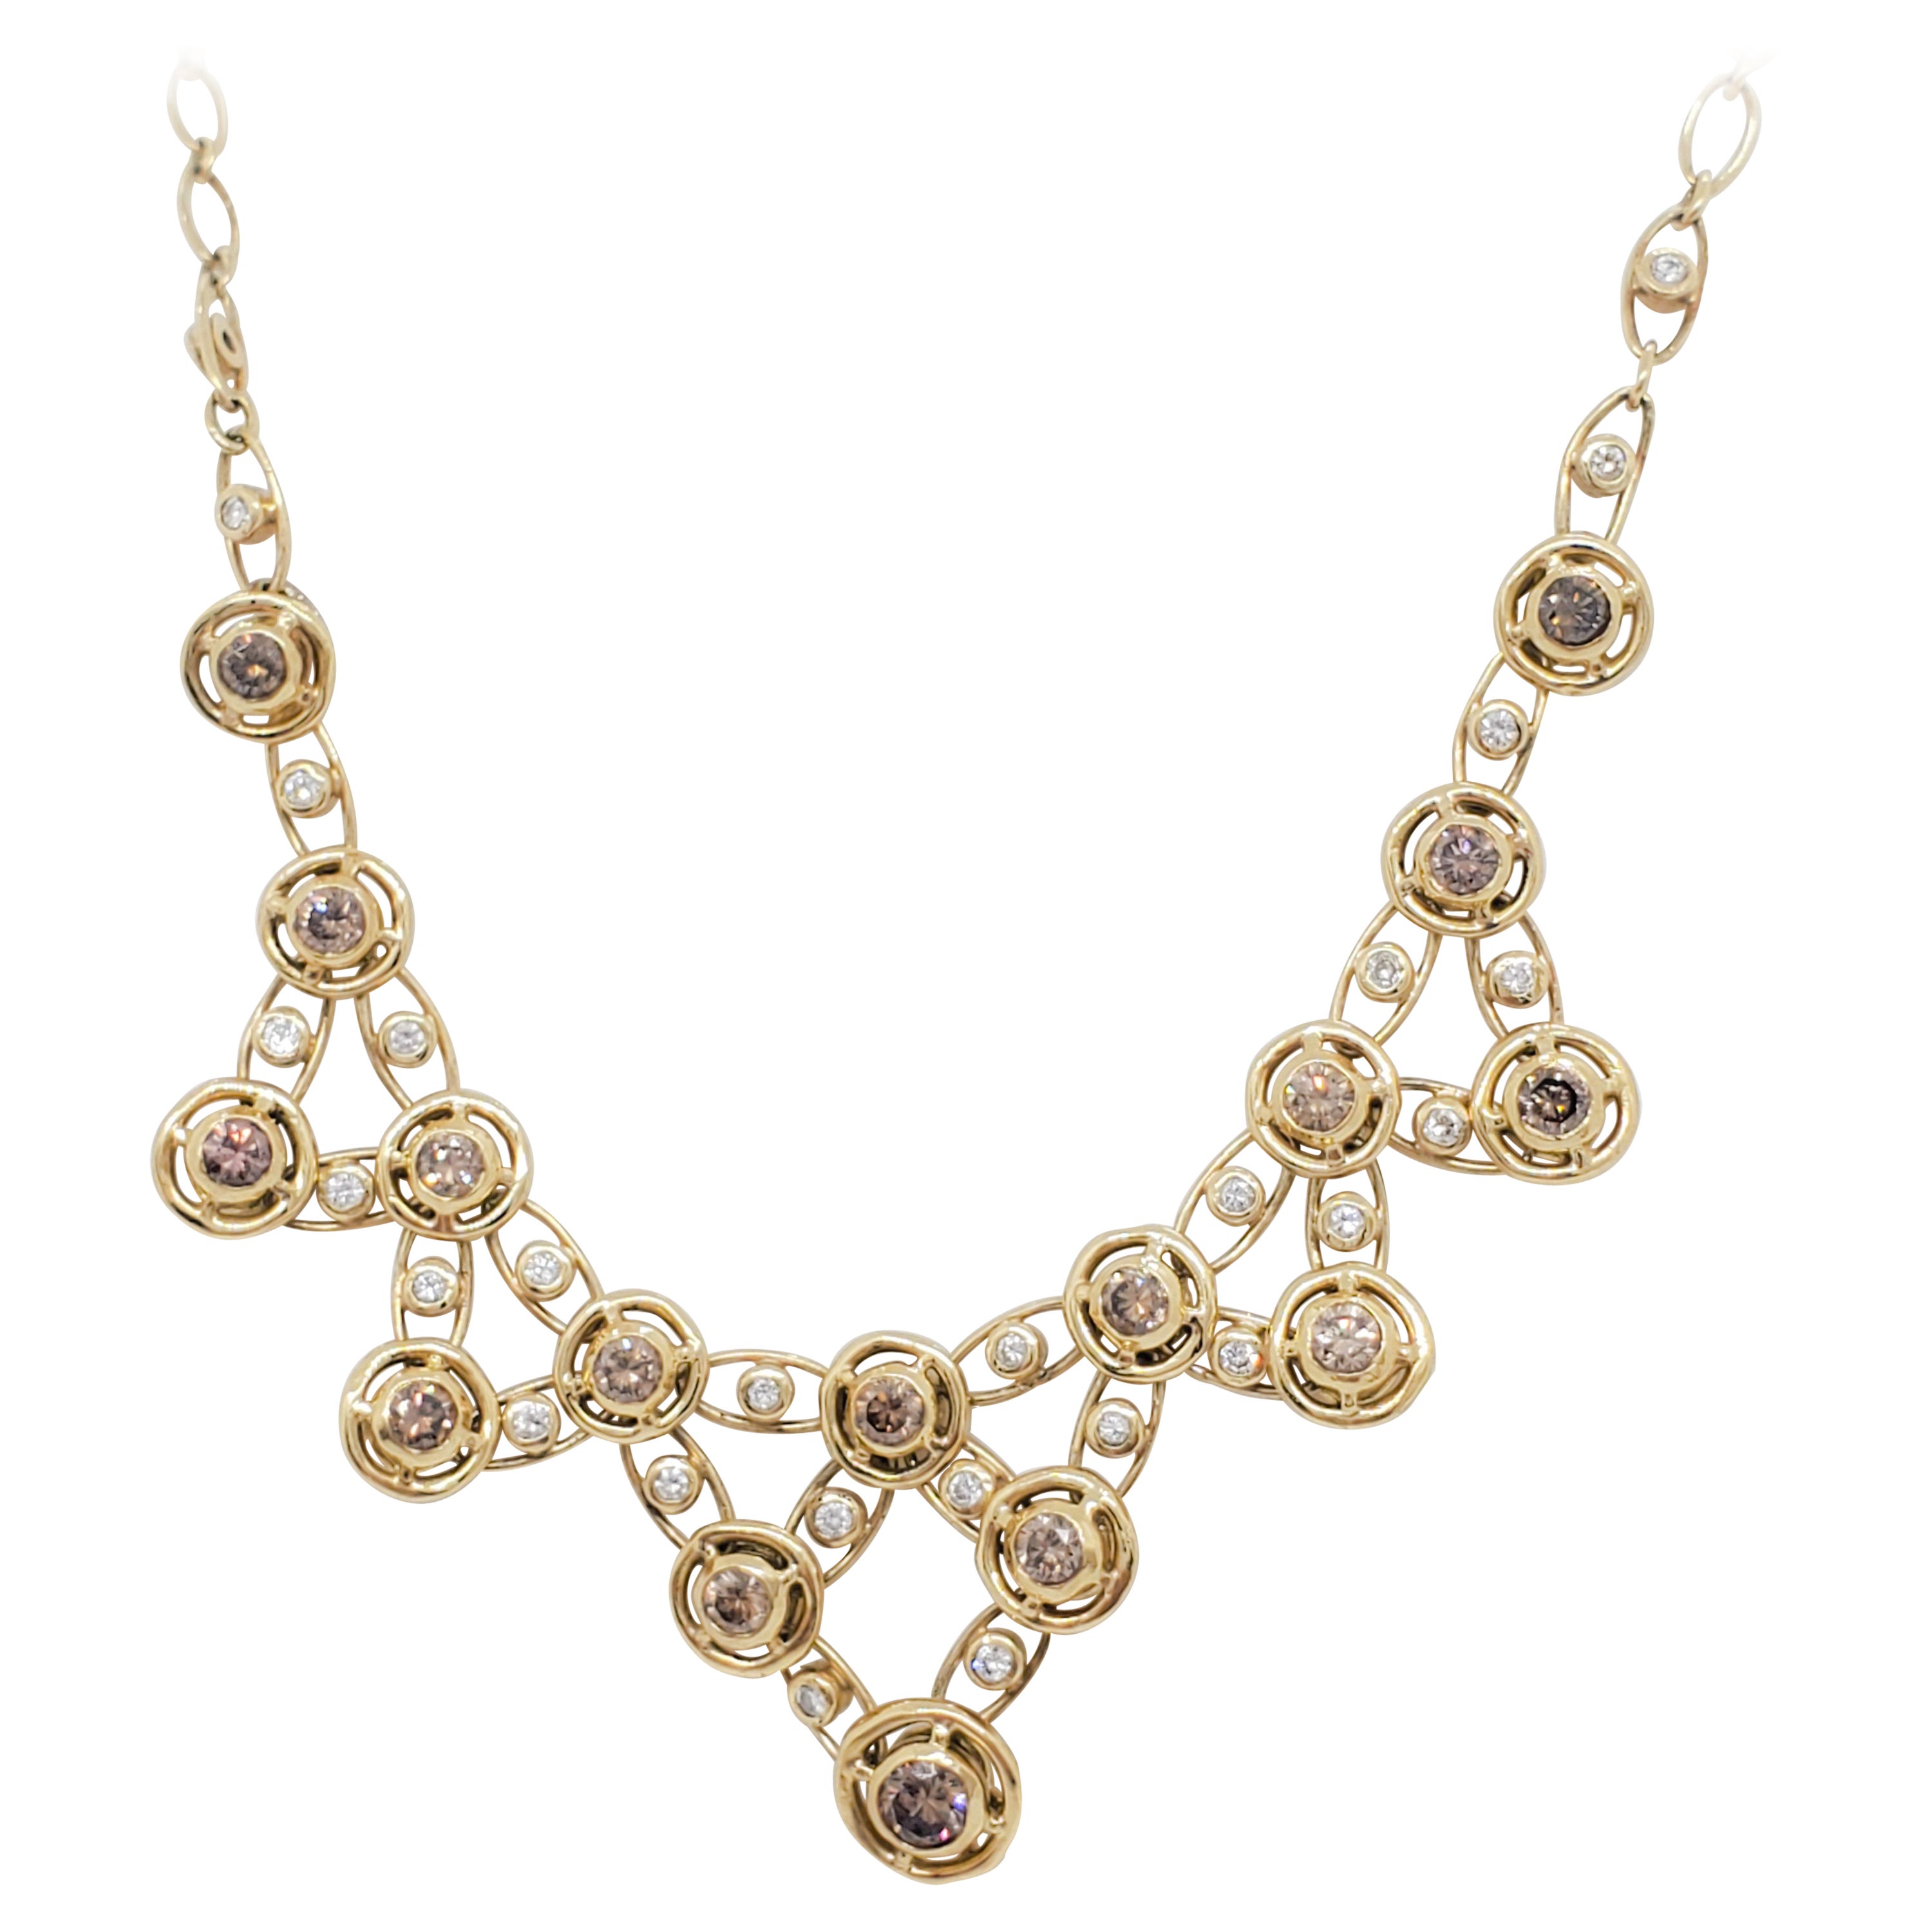 Estate H. Stern Diamond Tiara and Necklace Set in 18k Yellow Gold